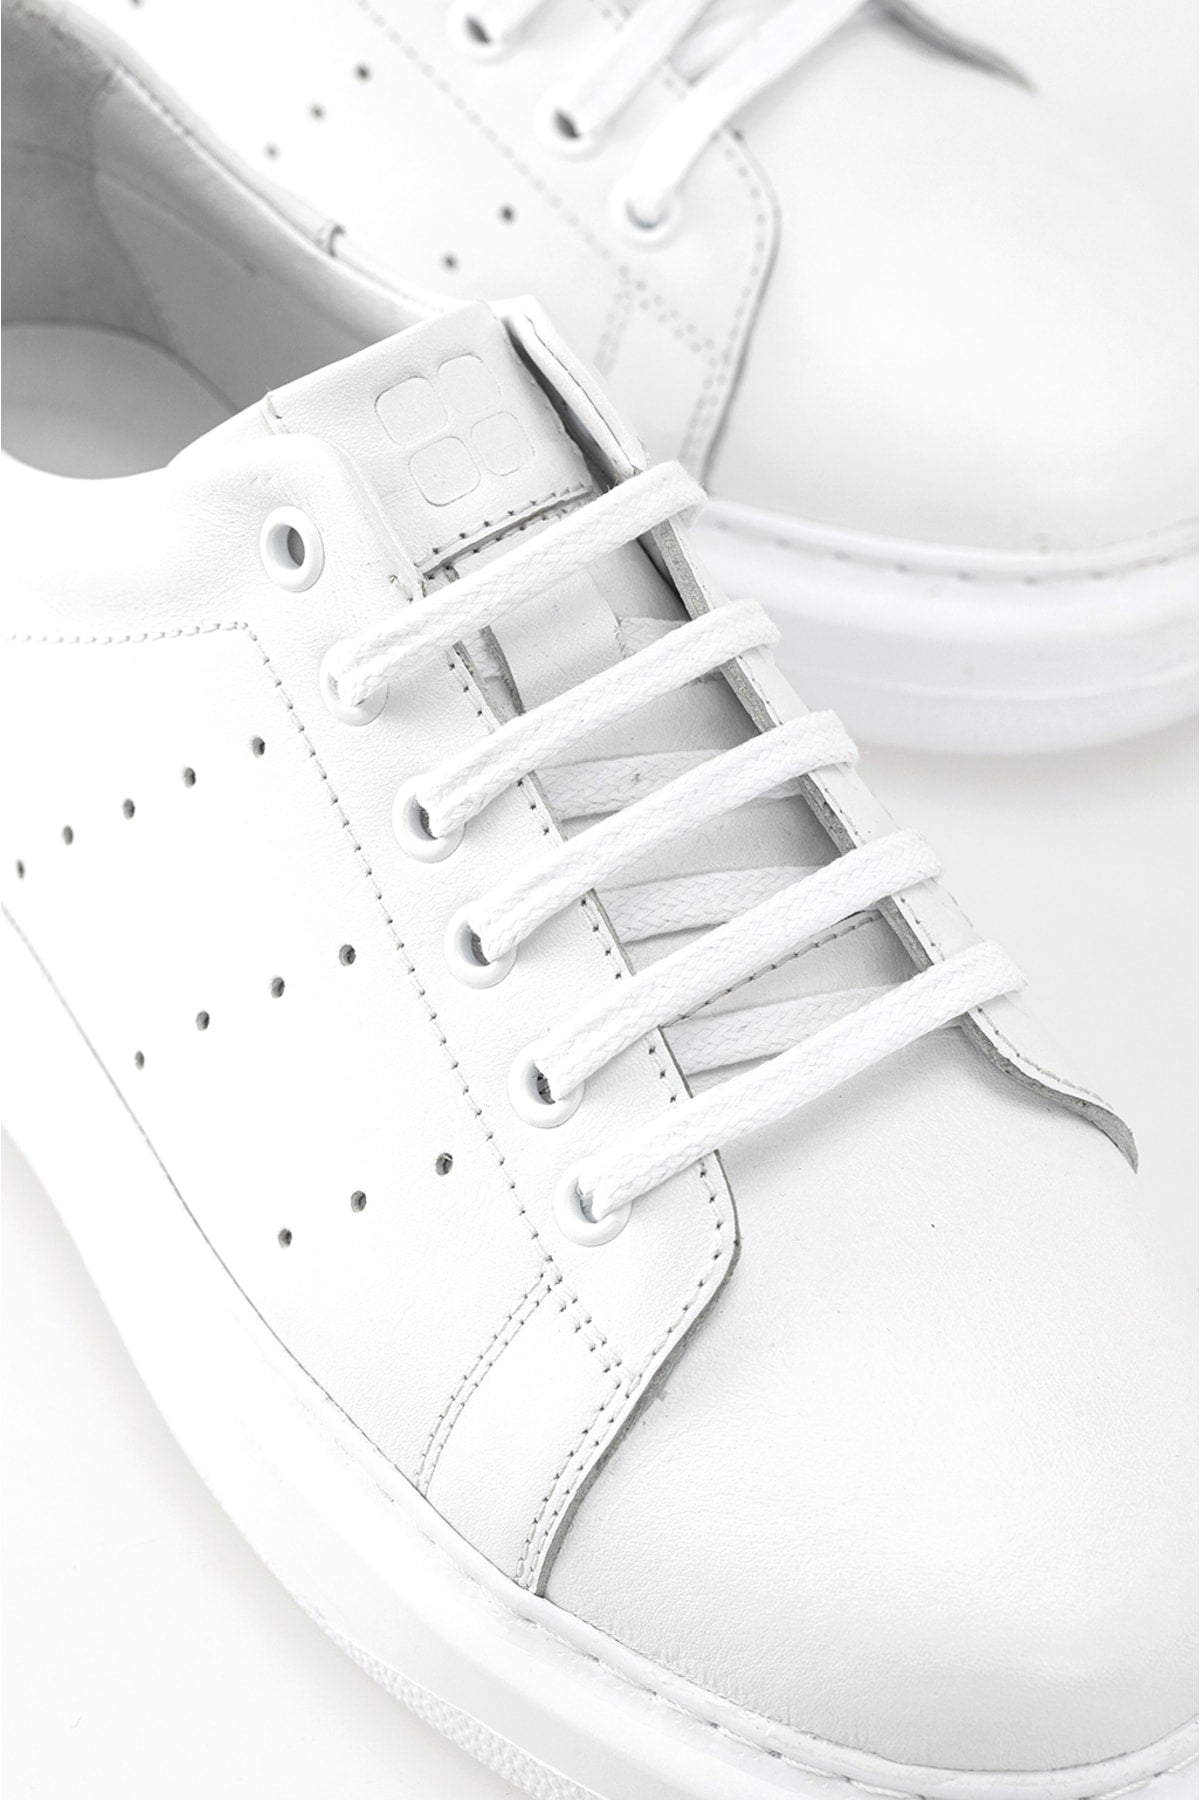 White 100 %Leather Sneaker Shoes